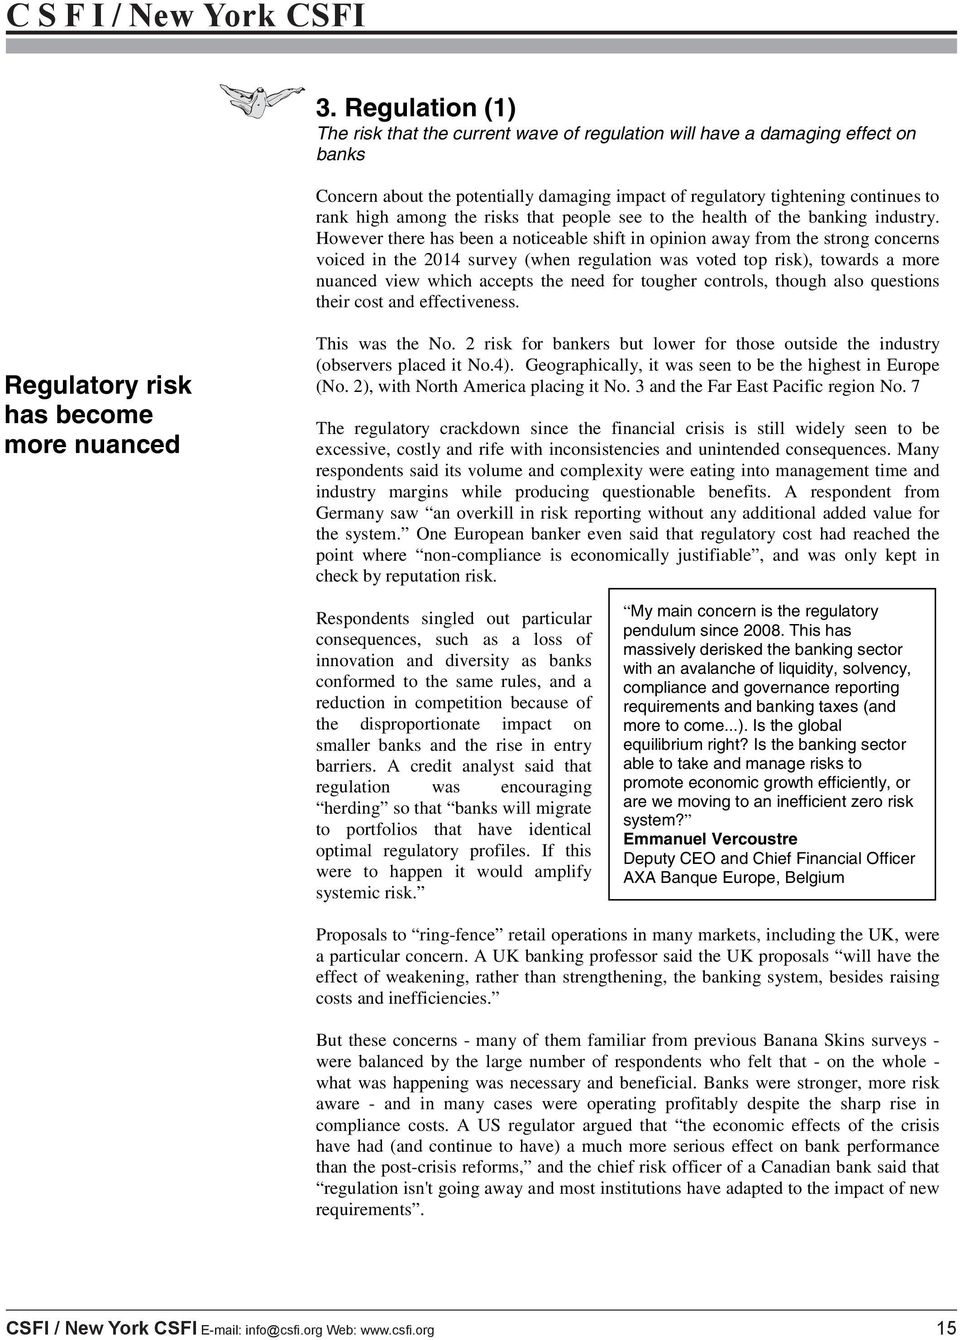 potentially damaging impact of regulatory tightening continues to Concern rank about high the potentially among the damaging risks that impact people of regulatory see the tightening health continues